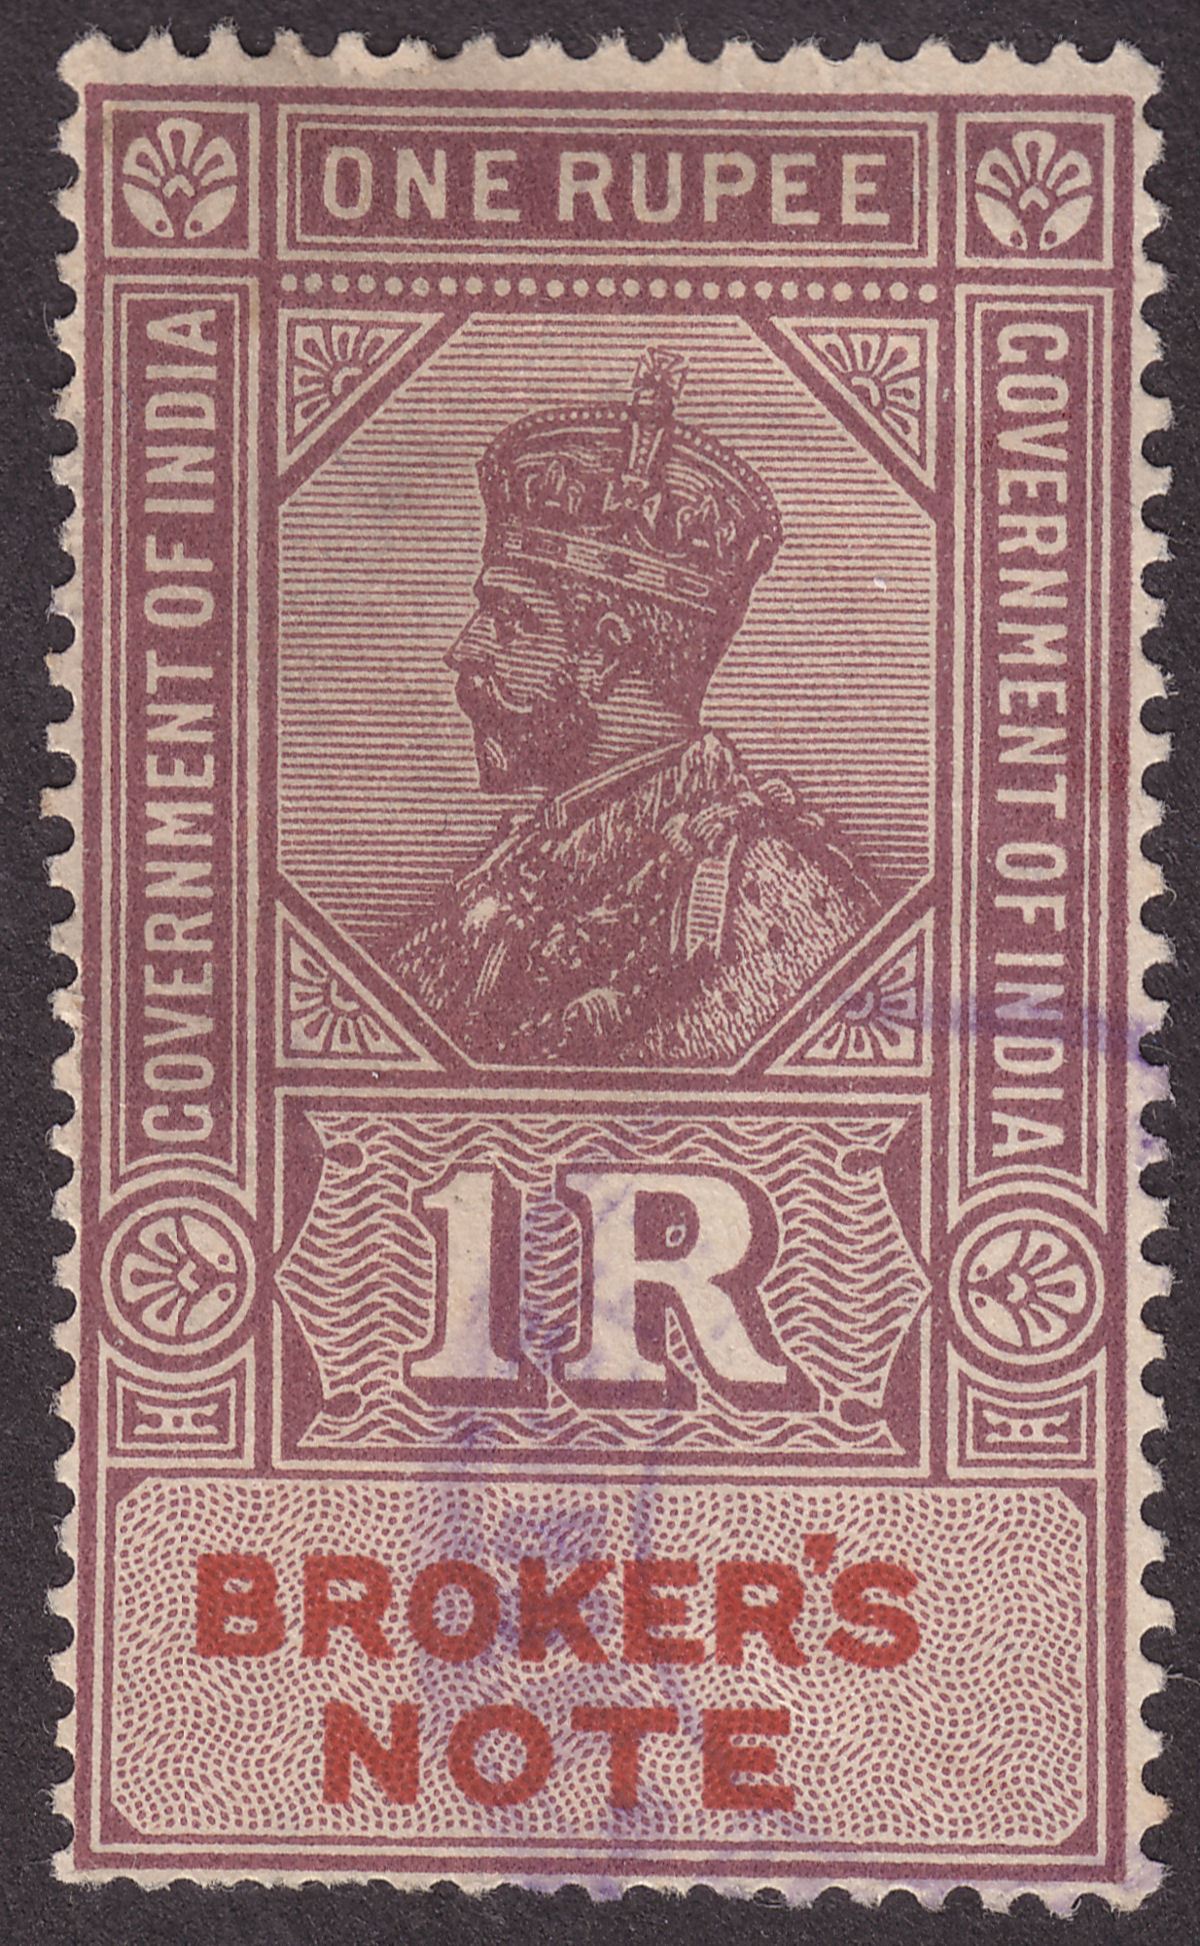 India 1926 KGV Revenue Broker's Note 1r Purple and Red Used BF26